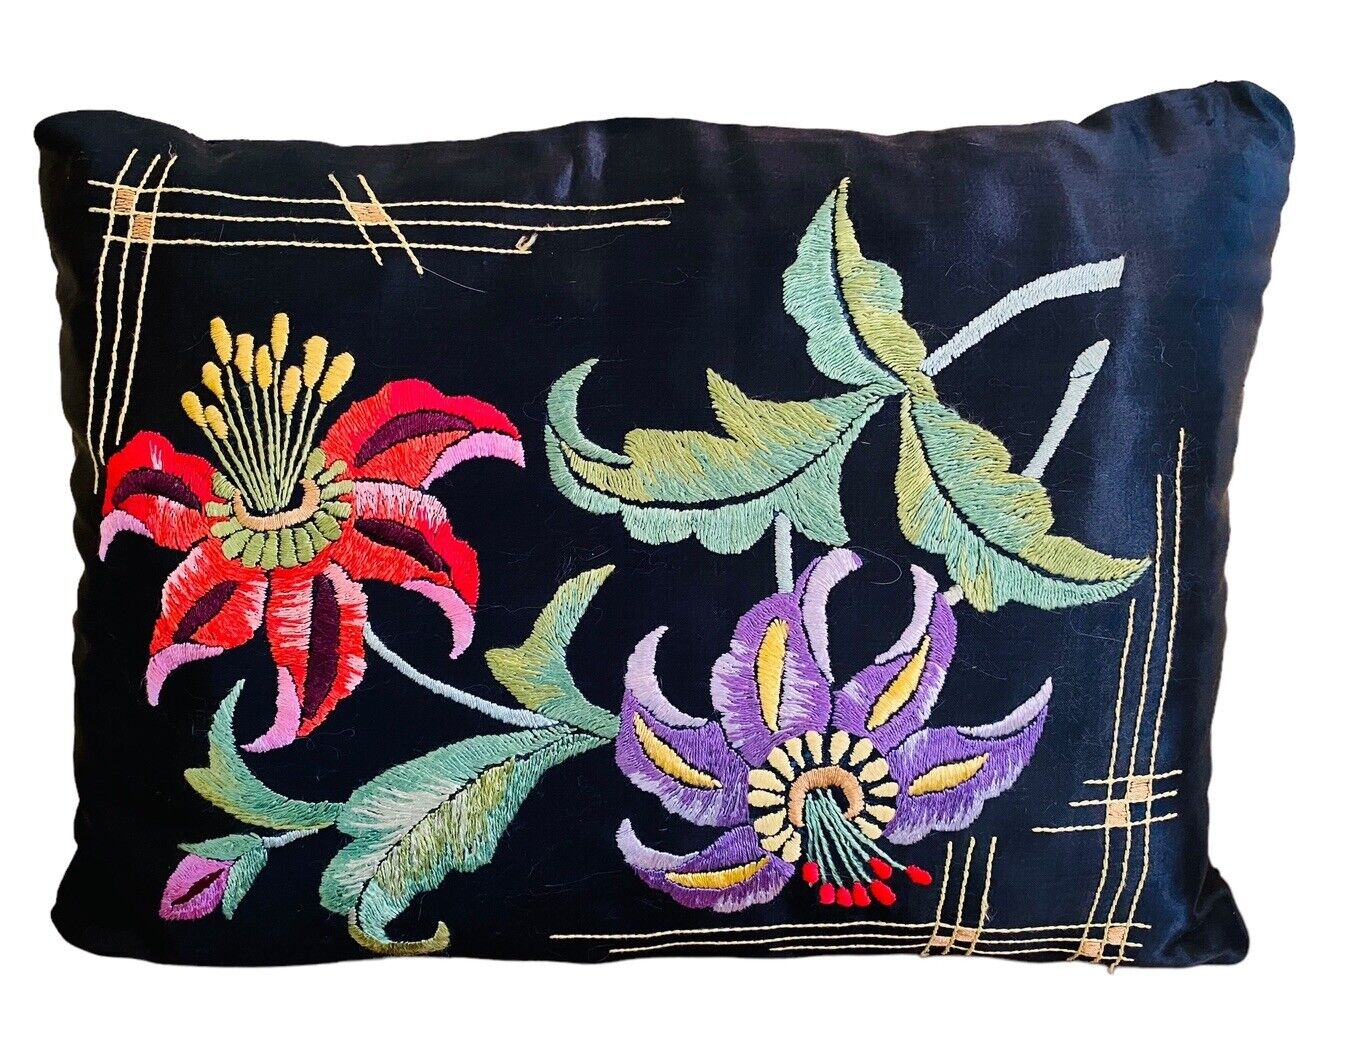 ORNATELY HAND-EMBROIDERED LARGE BLACK PILLOW, MEASURES 22” X 18” X6”